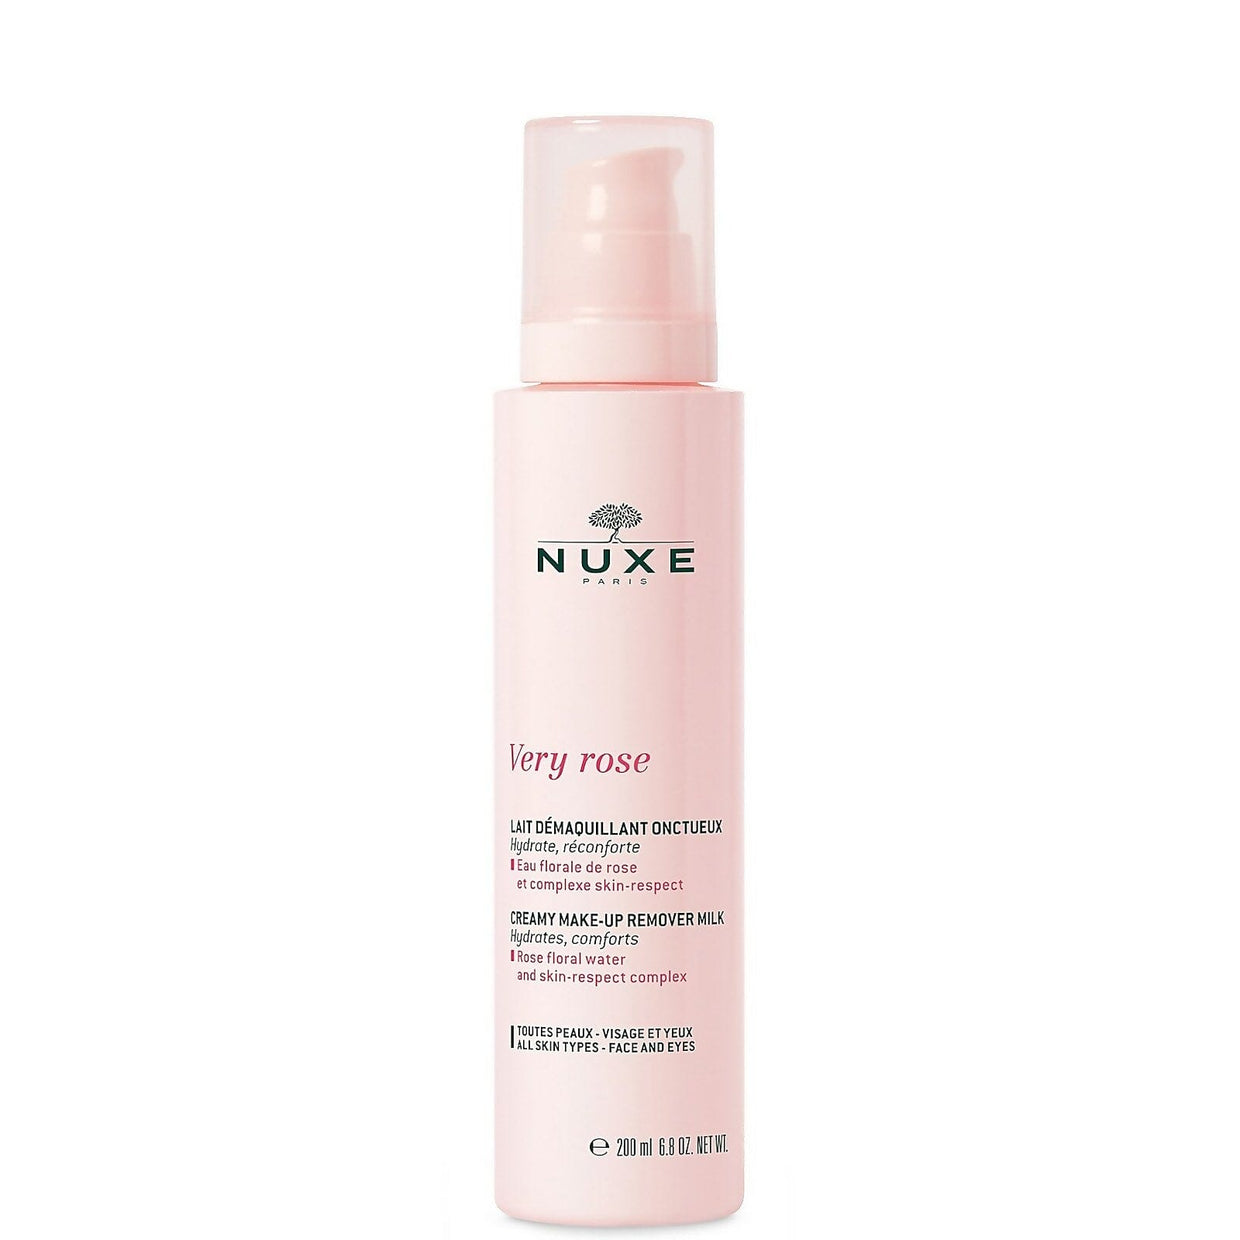 Nuxe Very Rose Creamy Make-Up Remover Milk Nuxe 6.8 fl. oz. (200ml) Shop at Exclusive Beauty Club